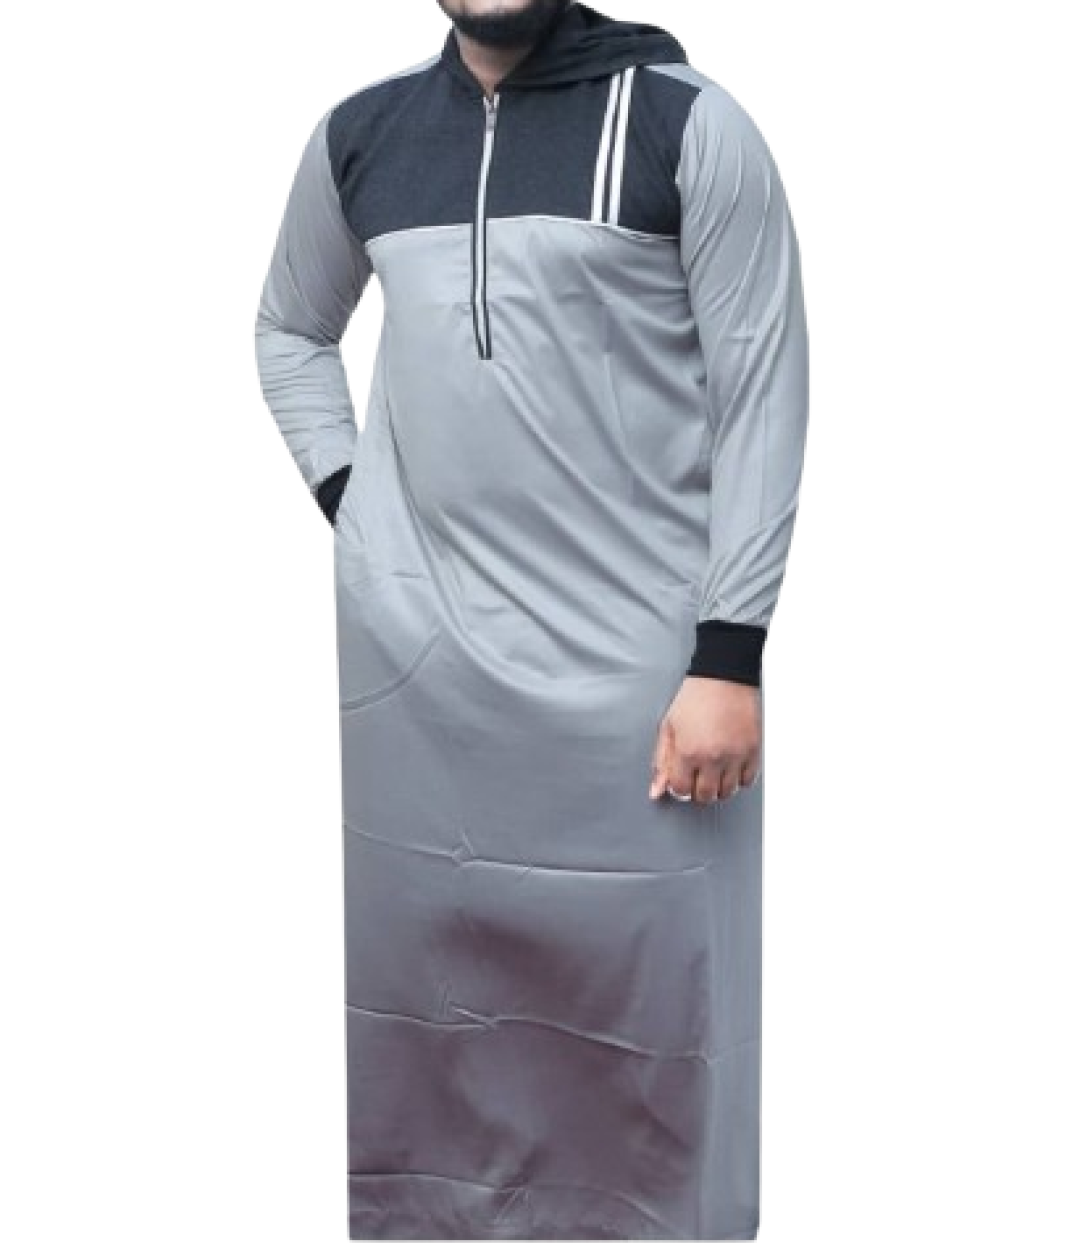 HOODED TUNIC KANZU FOR MEN,DARK SILVER, ISLAMIC OR MUSLIM CLOTHING COLLECTIONS, PRAYER ROBES, CHEST AND WRIST COLOUR PATTERNS,VARIED SIZES,LONG SLEEVED, NO CHEST POCKETS, ZIP LINE CHEST, MODESTY, SIMPLE AND CLASSY, FROM TURKEY